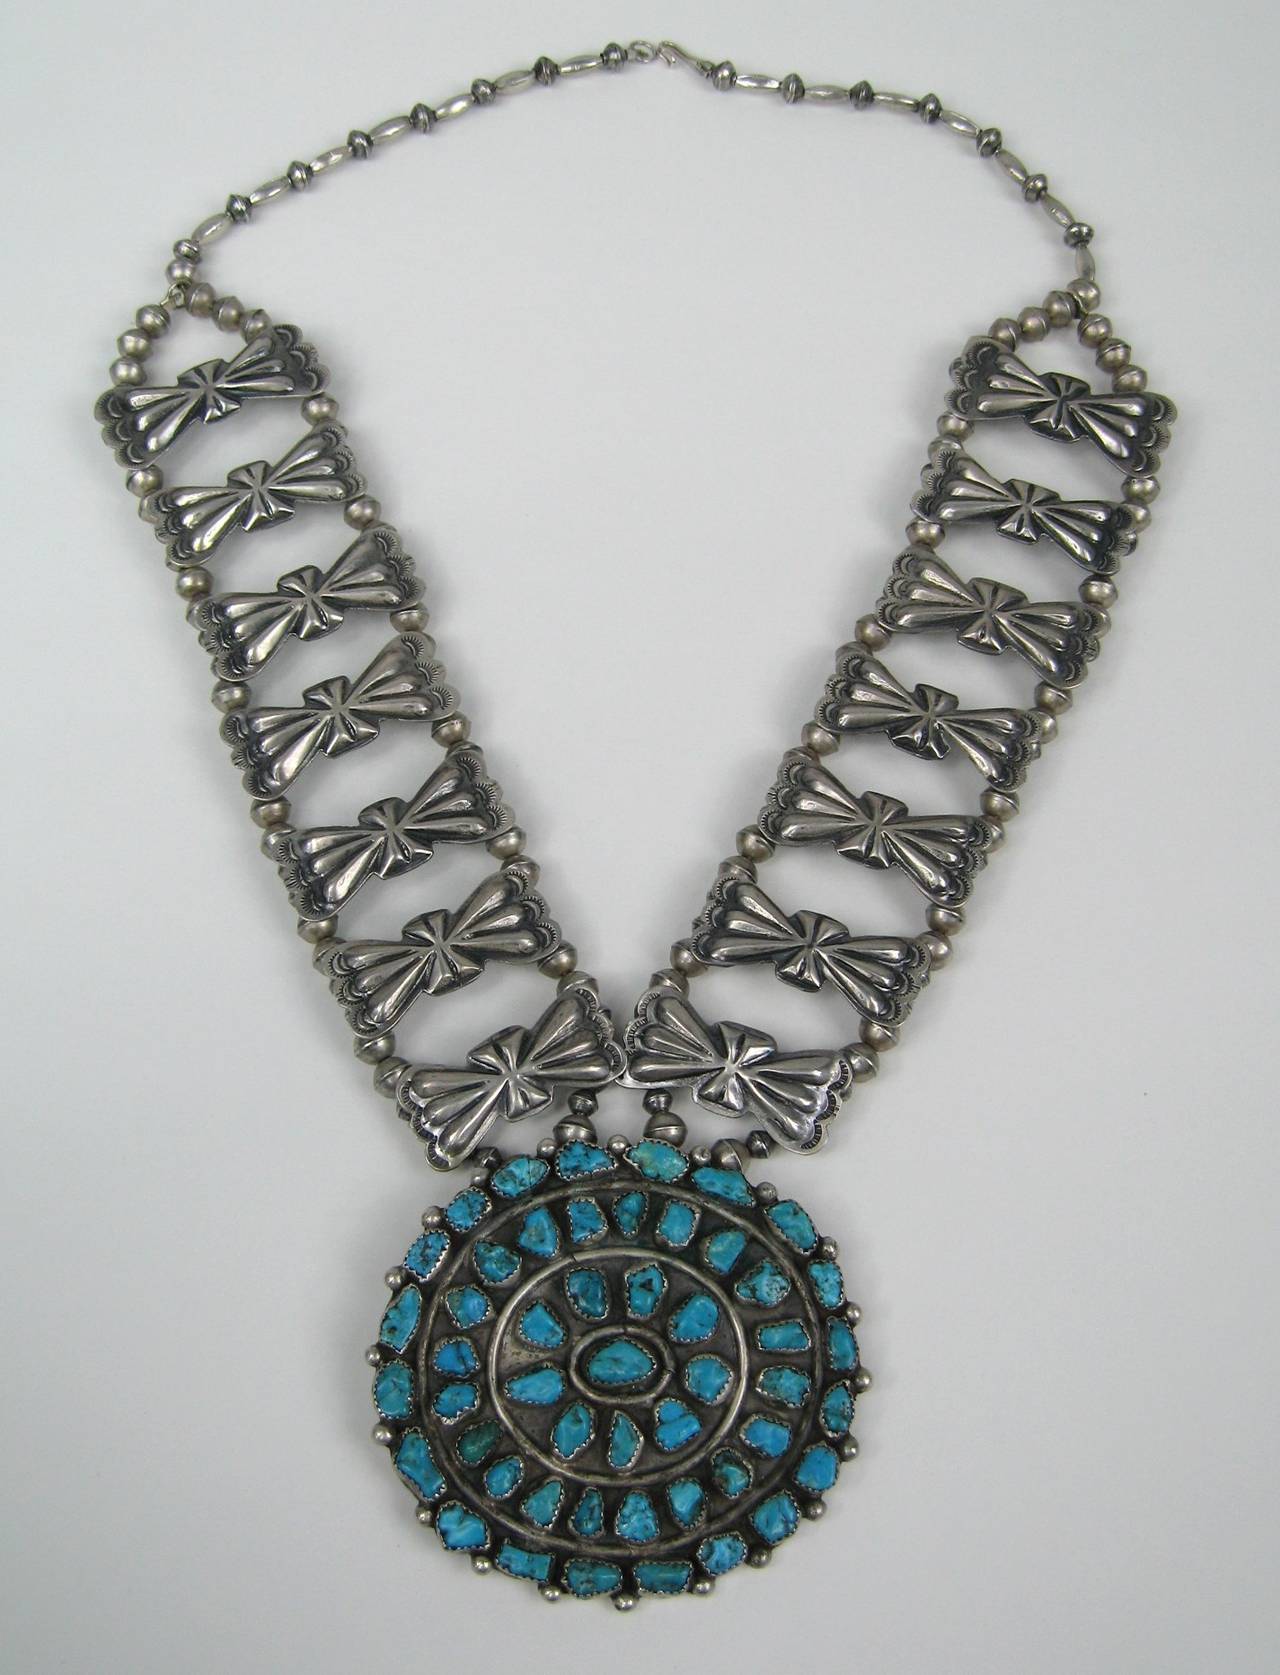 Massive handmade Turquoise hanging from a butterfly motif necklace. The craftsmanship on this is stunning. The oval has a pin back on it. The oval drop measures 3.22 in wide  x 3.09 in high. The links are 1.77 in x .78 in set on a double beaded